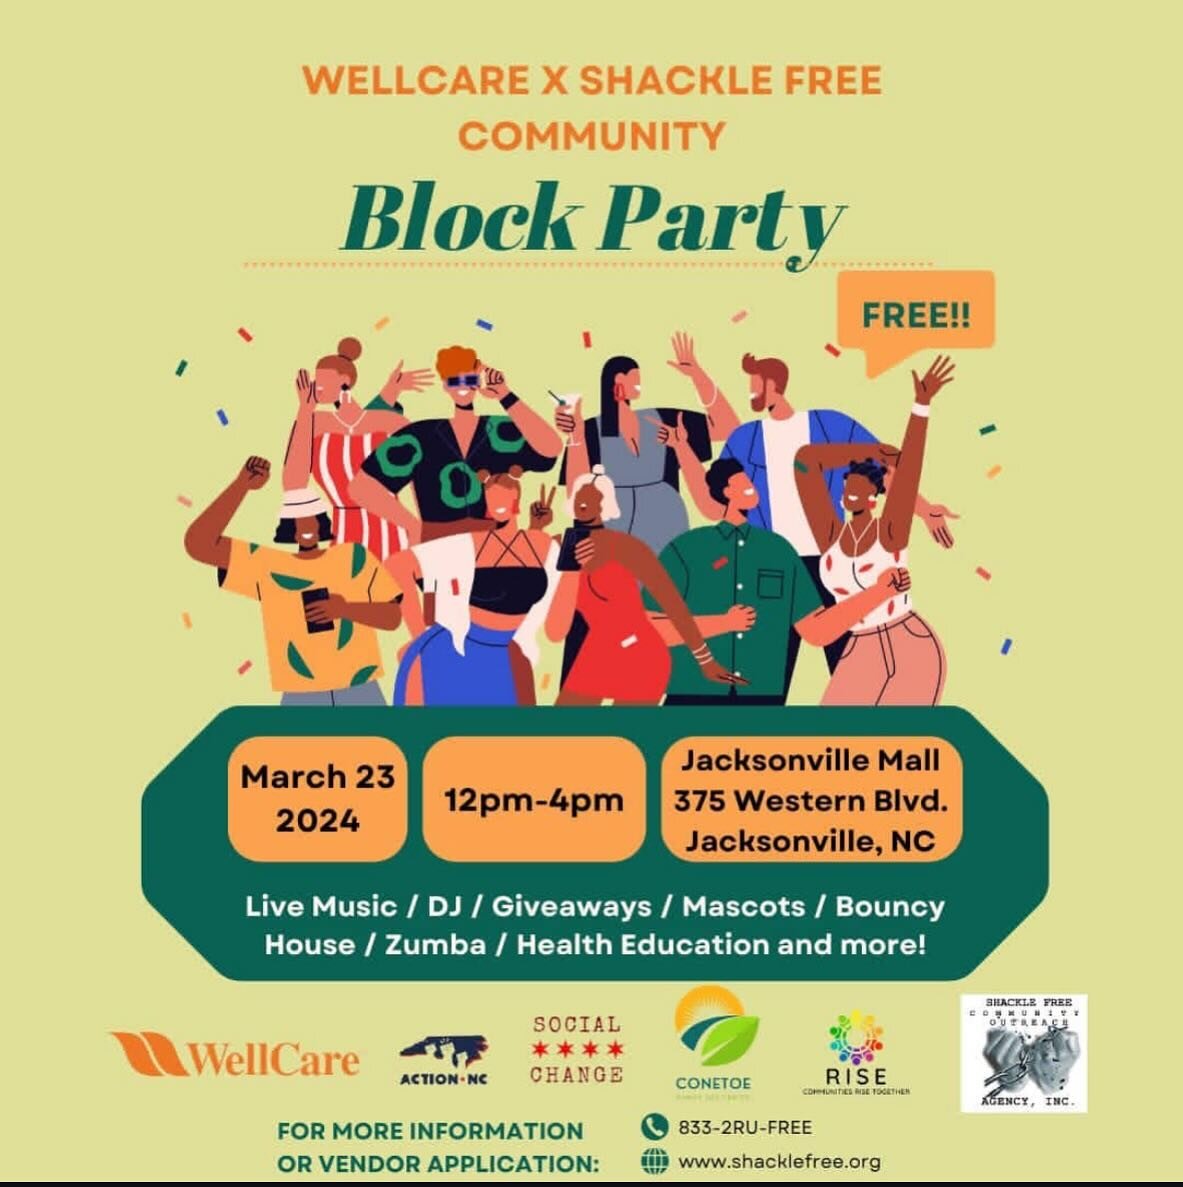 🎊Join us for a day of fun, fitness, and community spirit at the WellCare x Shackle Free Community Block Party! 

🎊 It&rsquo;s a celebration with live music, a DJ, giveaways, and activities for all ages. Don&rsquo;t miss out on the excitement at Jac